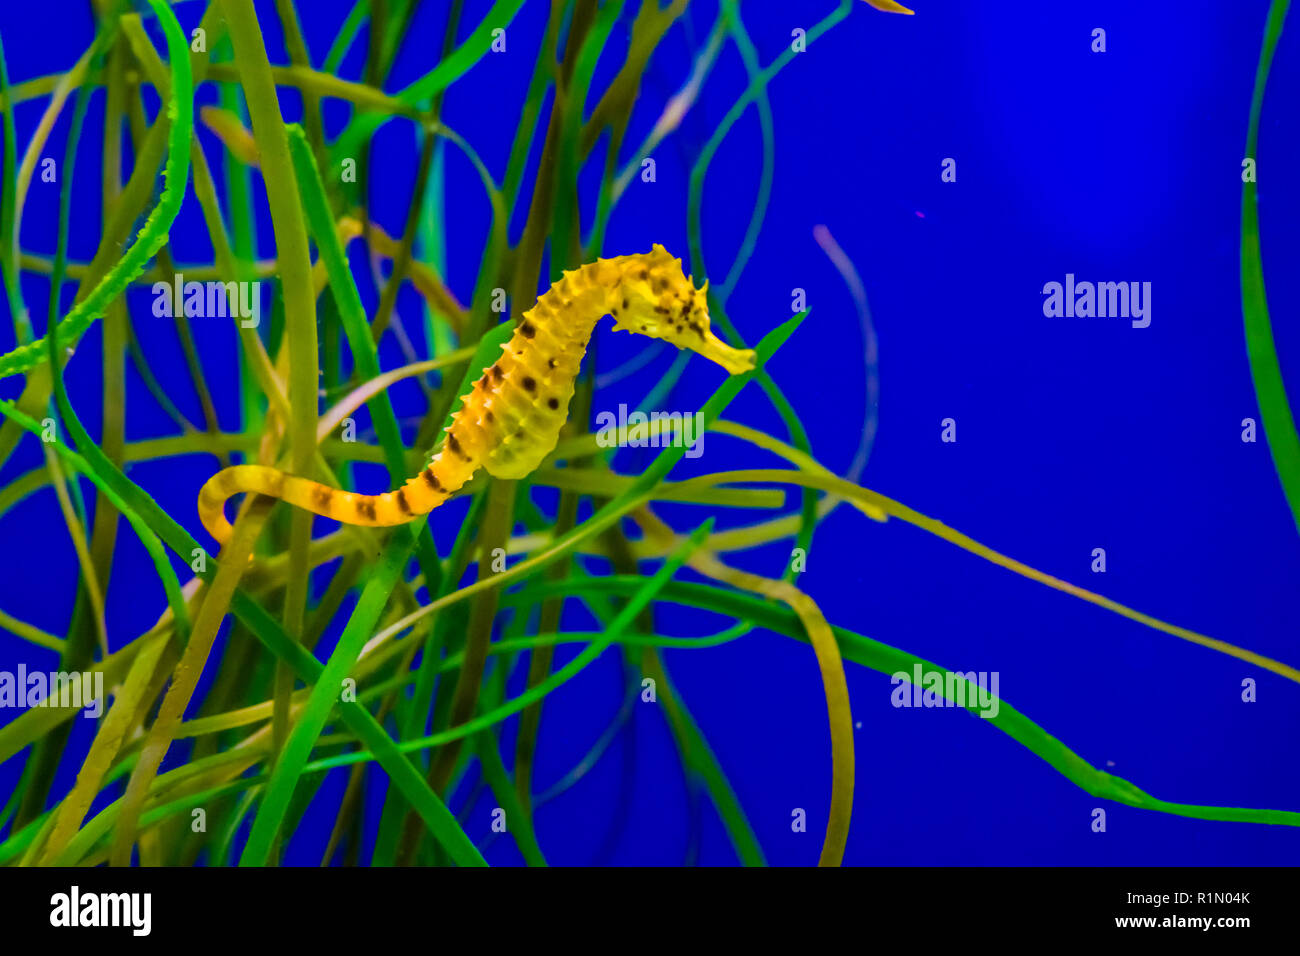 common estuary spotted yellow seahorse hanging on some grass in the tropical water aquarium Stock Photo